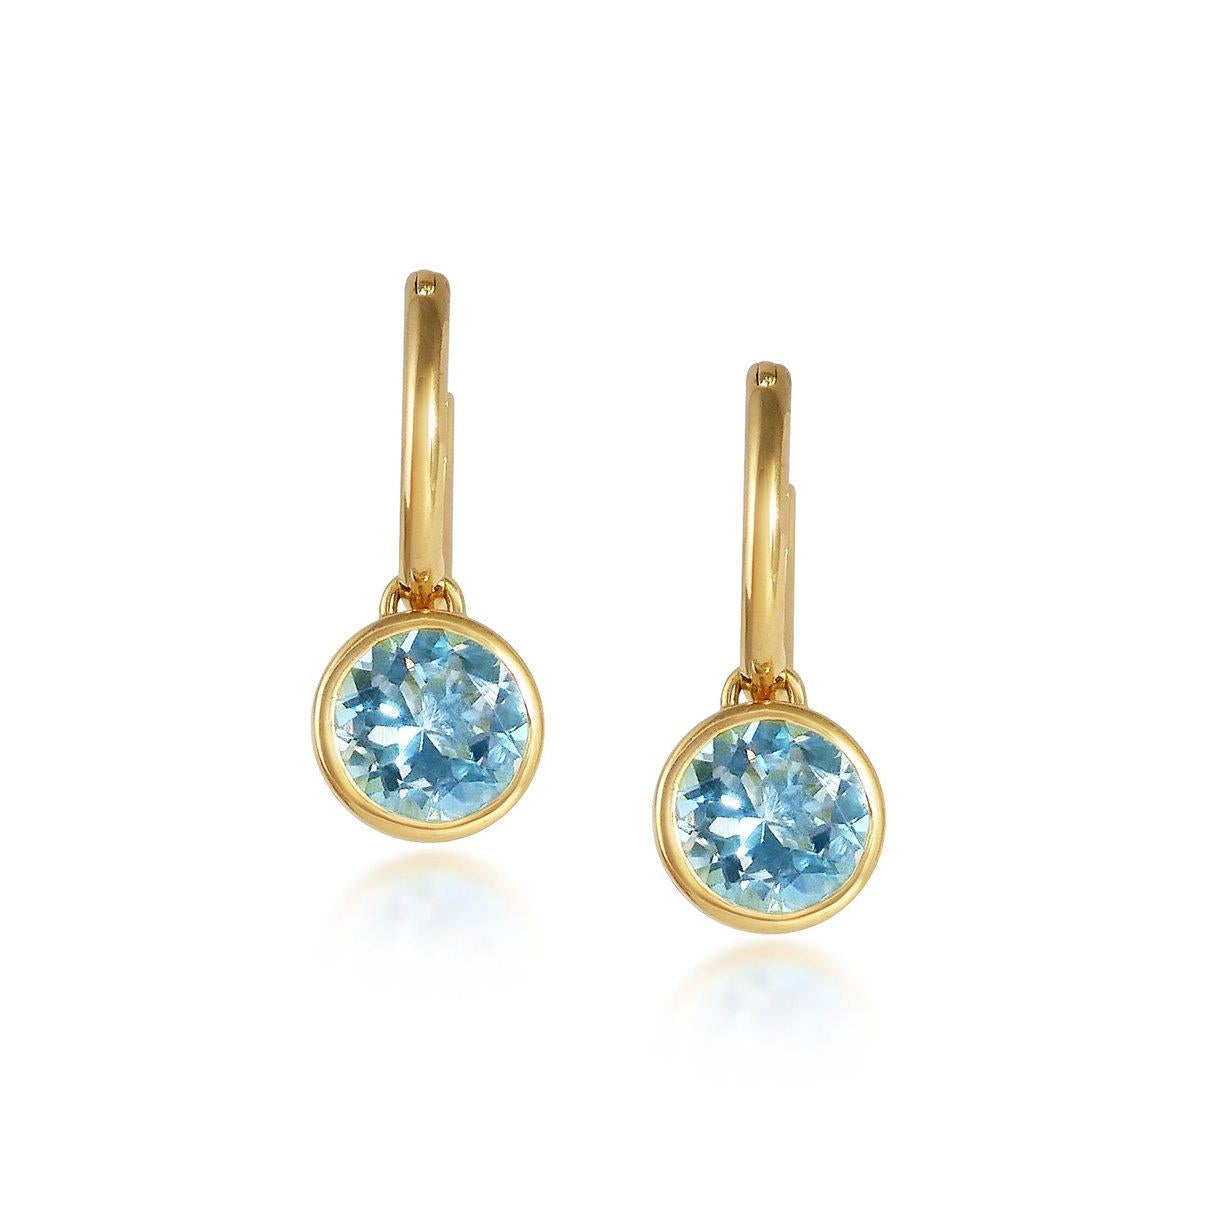 Round Cut Handcrafted 2.70 Carats Aquamarine 18 Karat Yellow Gold Drop Earrings For Sale